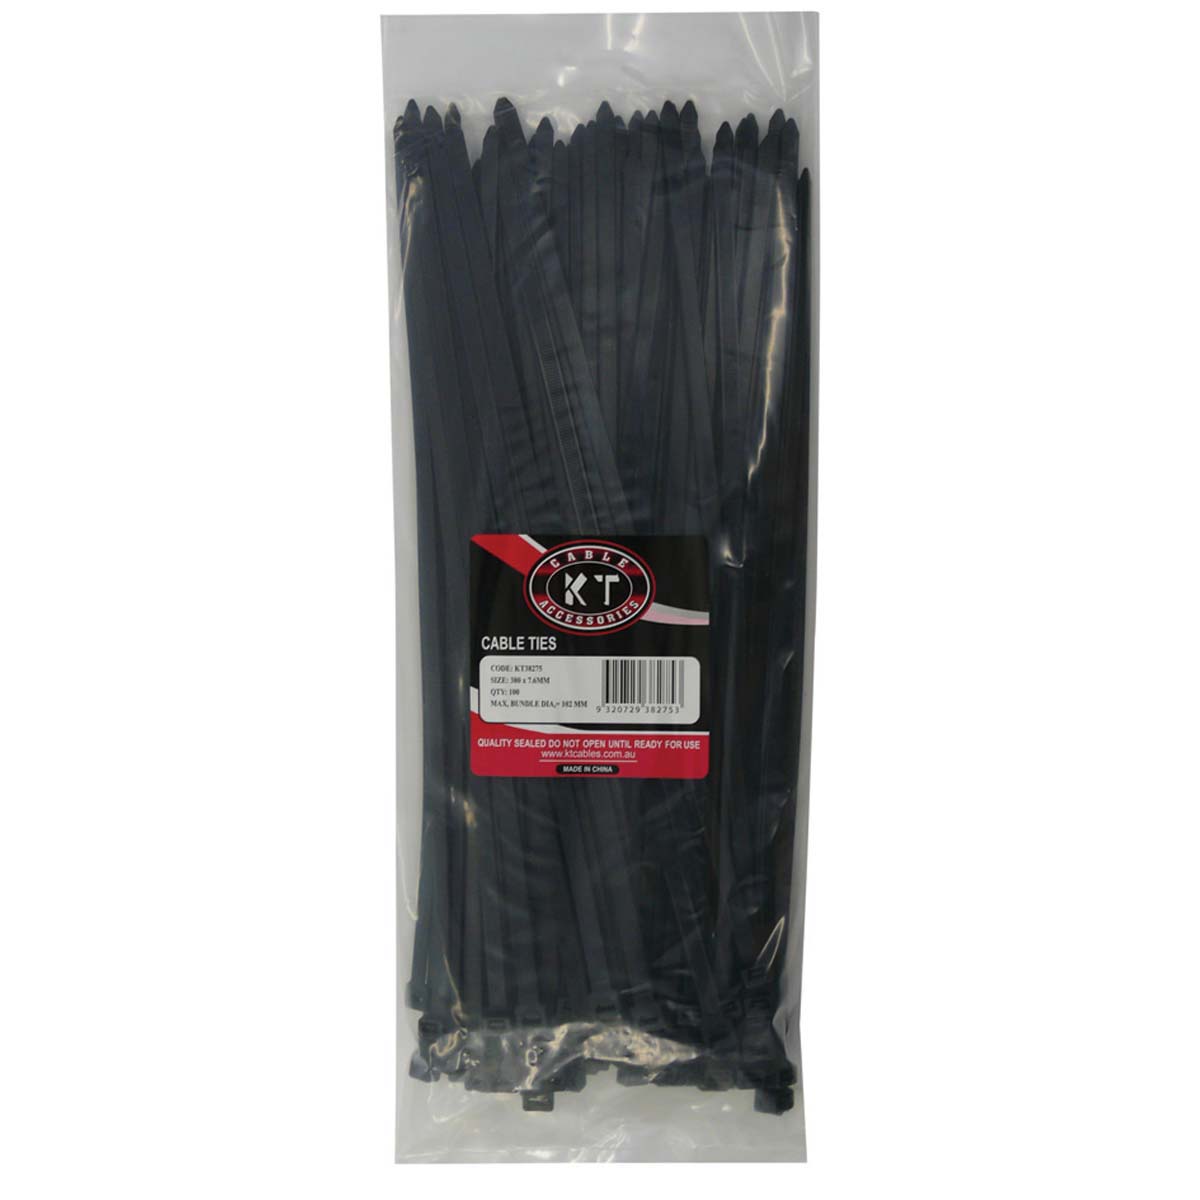 KT Cables 7.6mm Cable Tie 380mm 100 Pieces